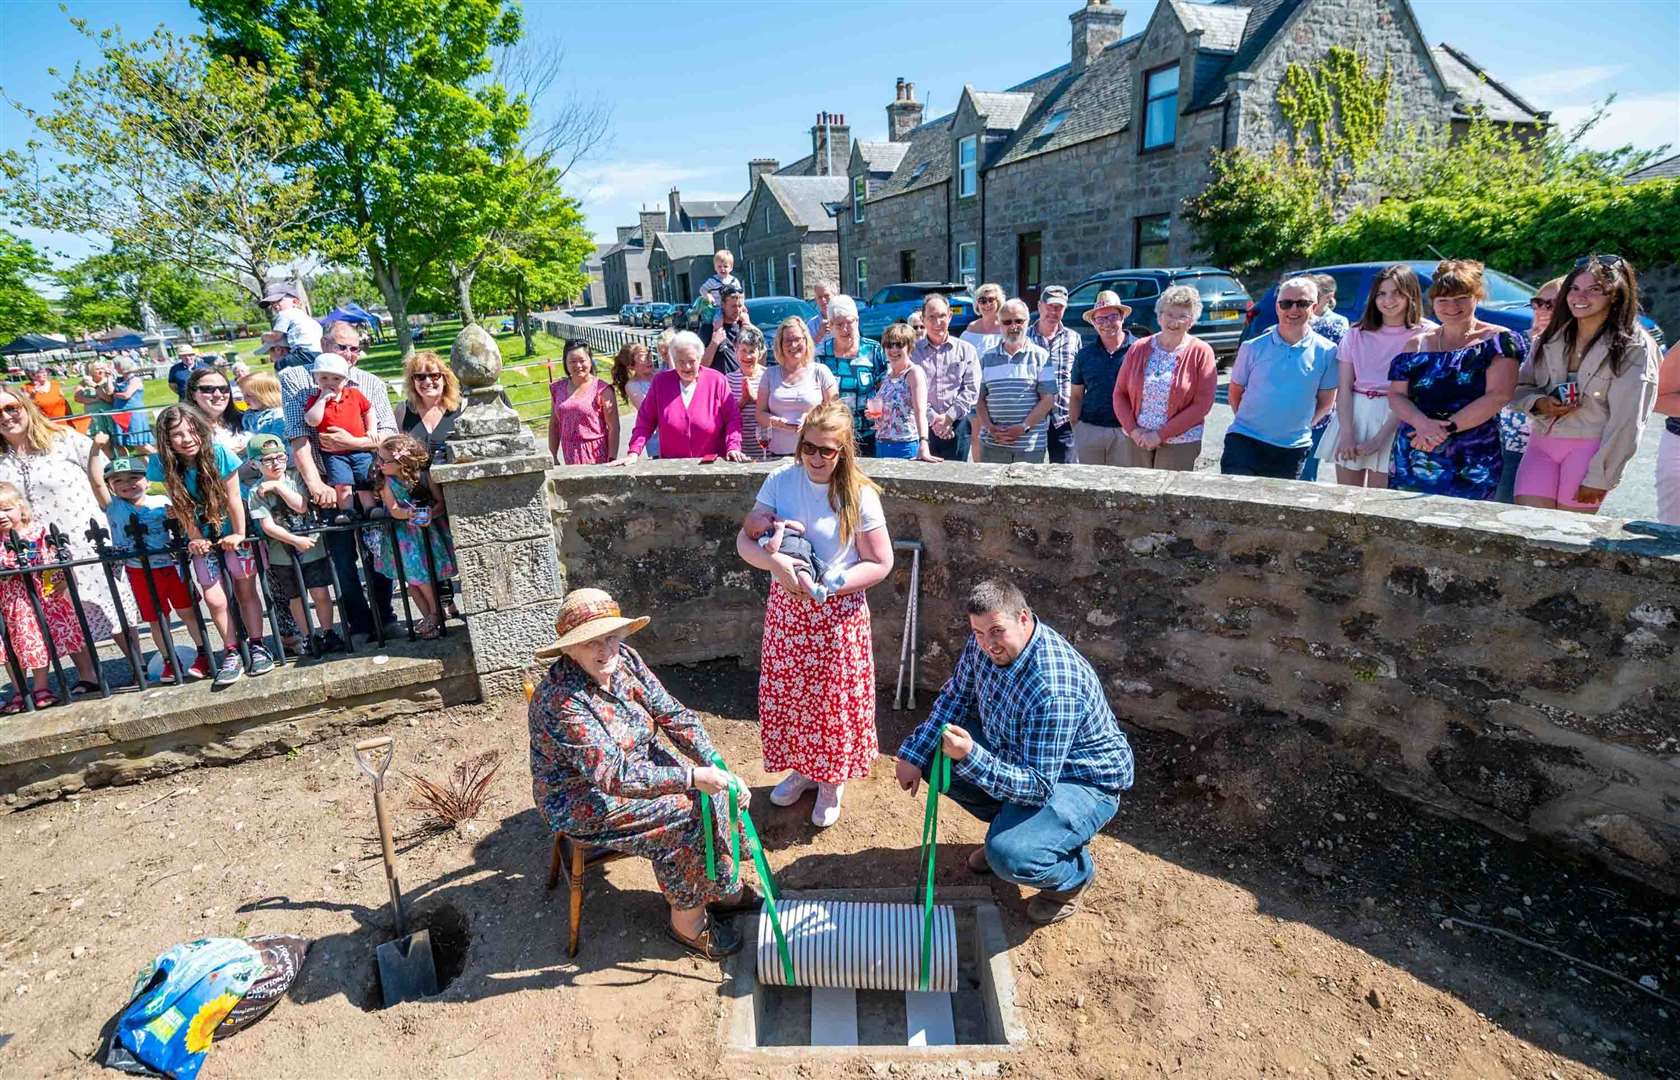 Spanning the generations as a time capsule is buried in the garden at Rhynie Church as part of the jubilee events. Picture: Michael Traill.